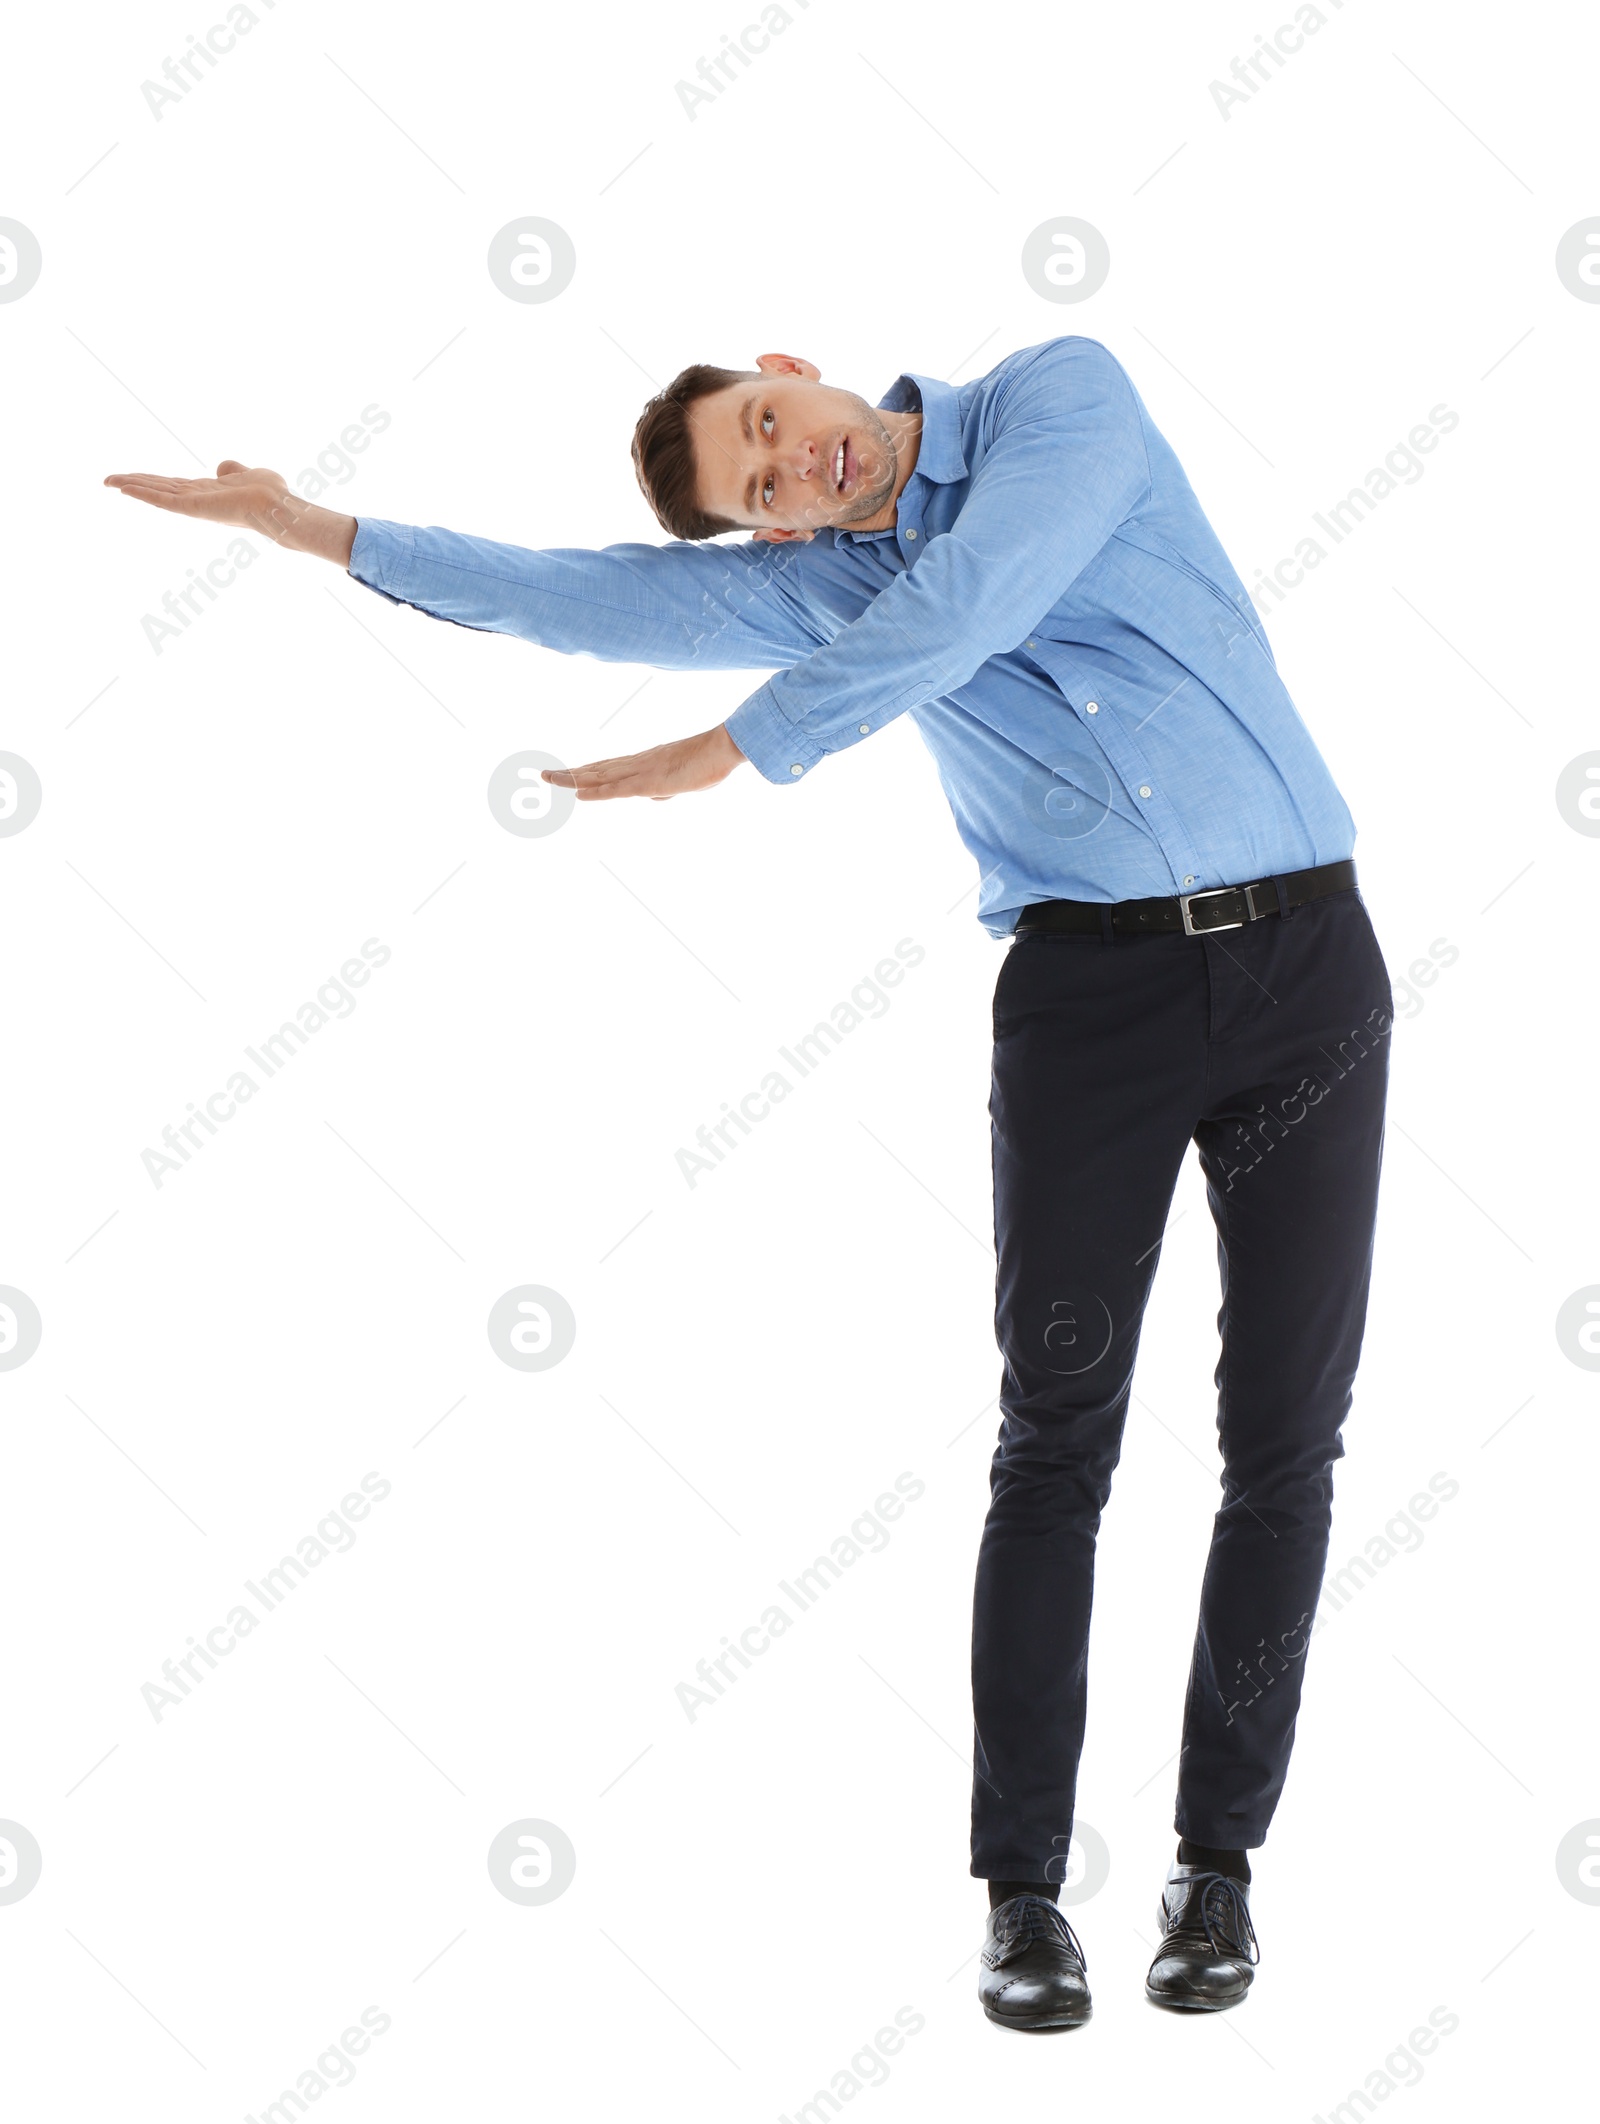 Photo of Man in office wear posing on white background